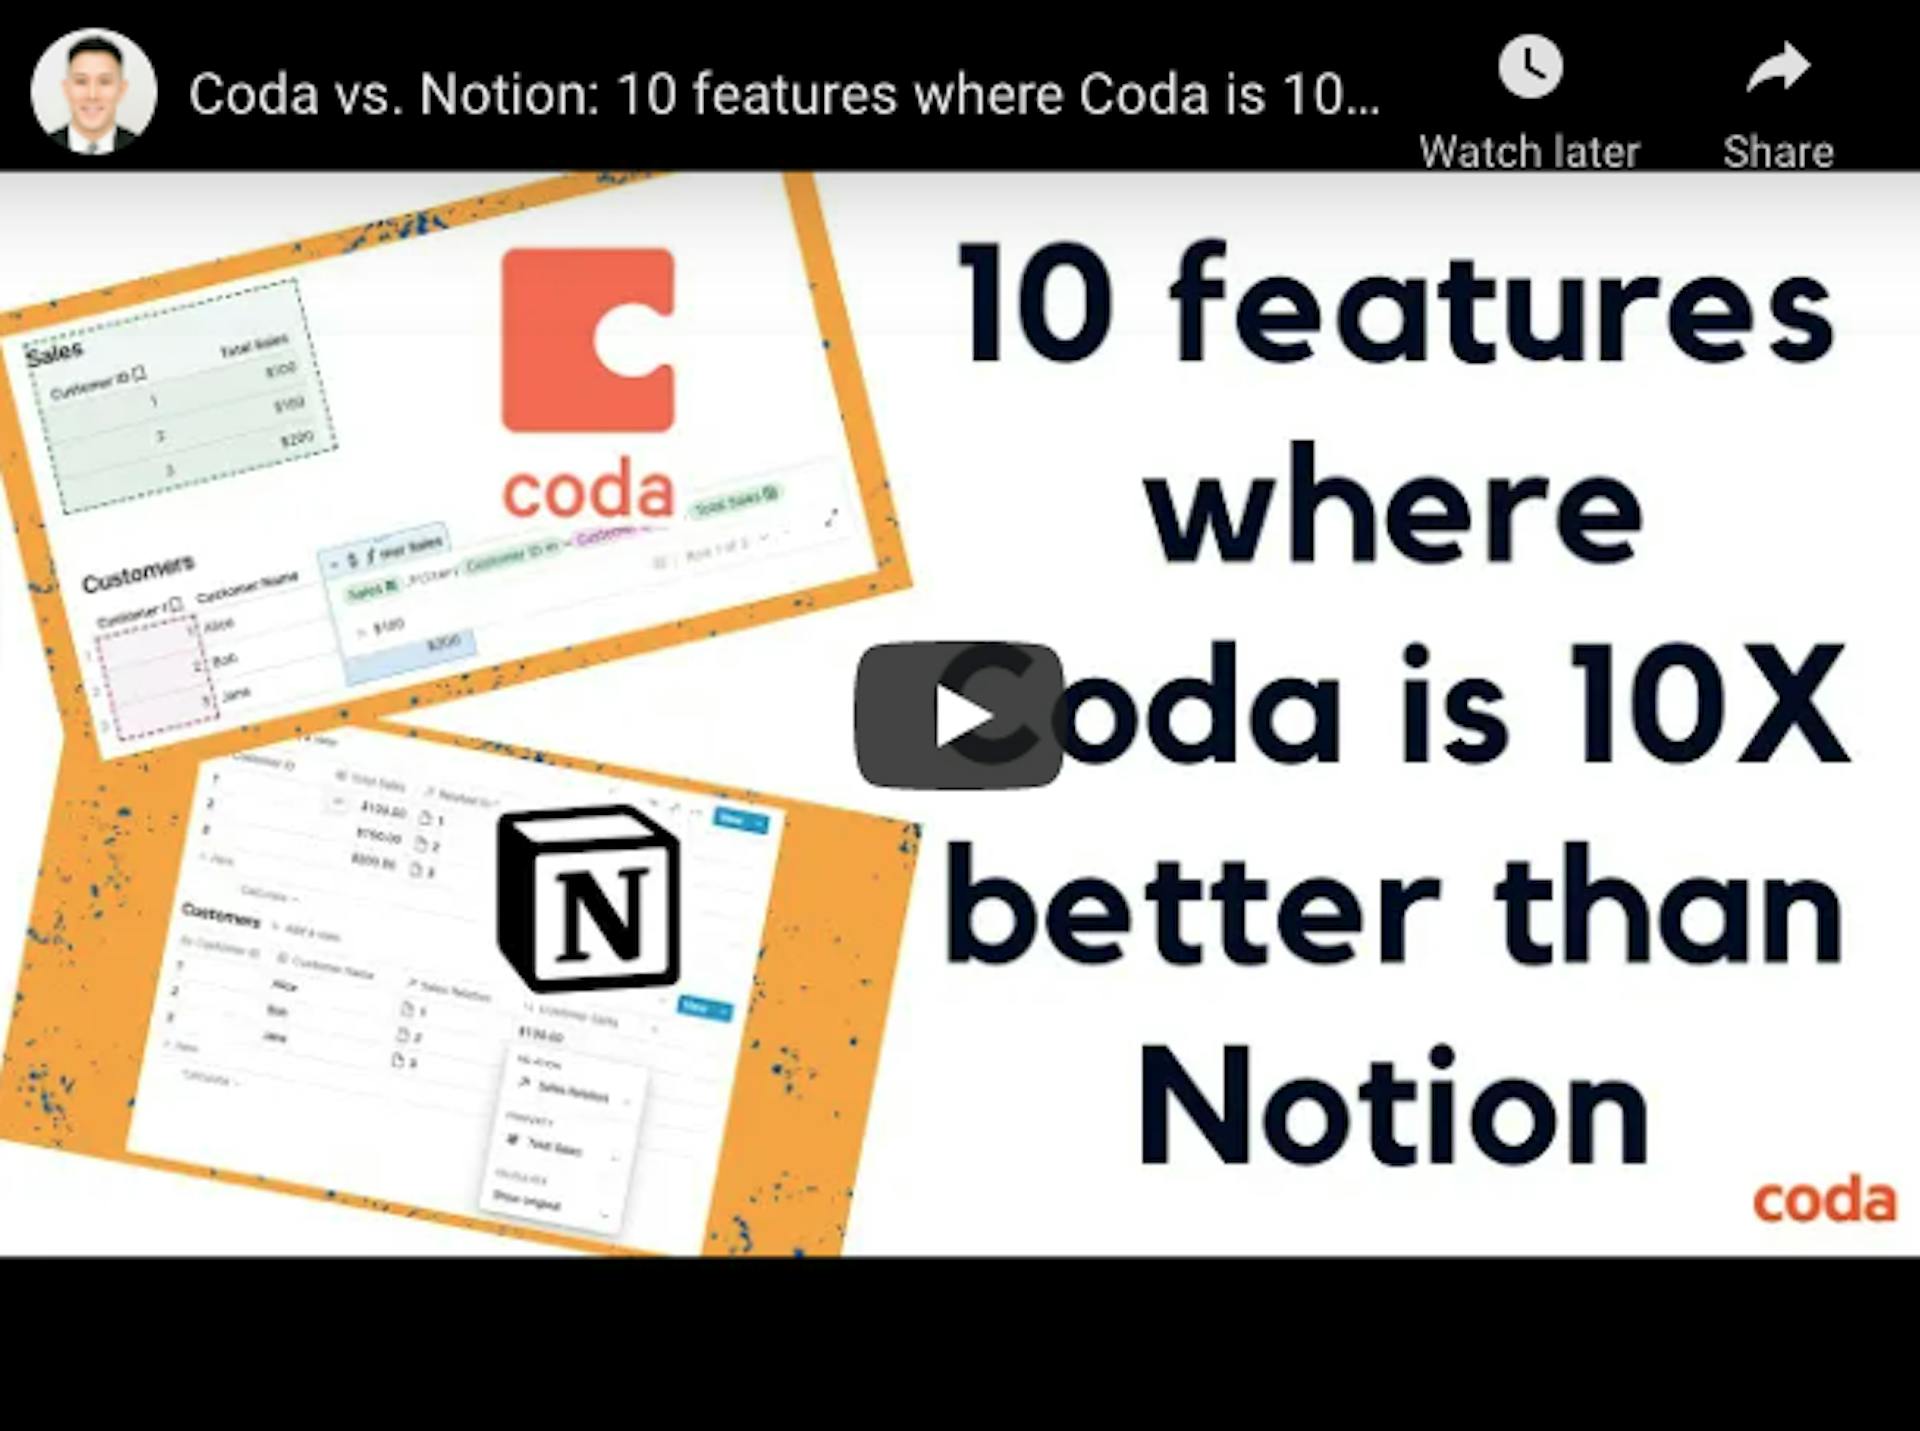 10 features where Coda is 10X better than Notion